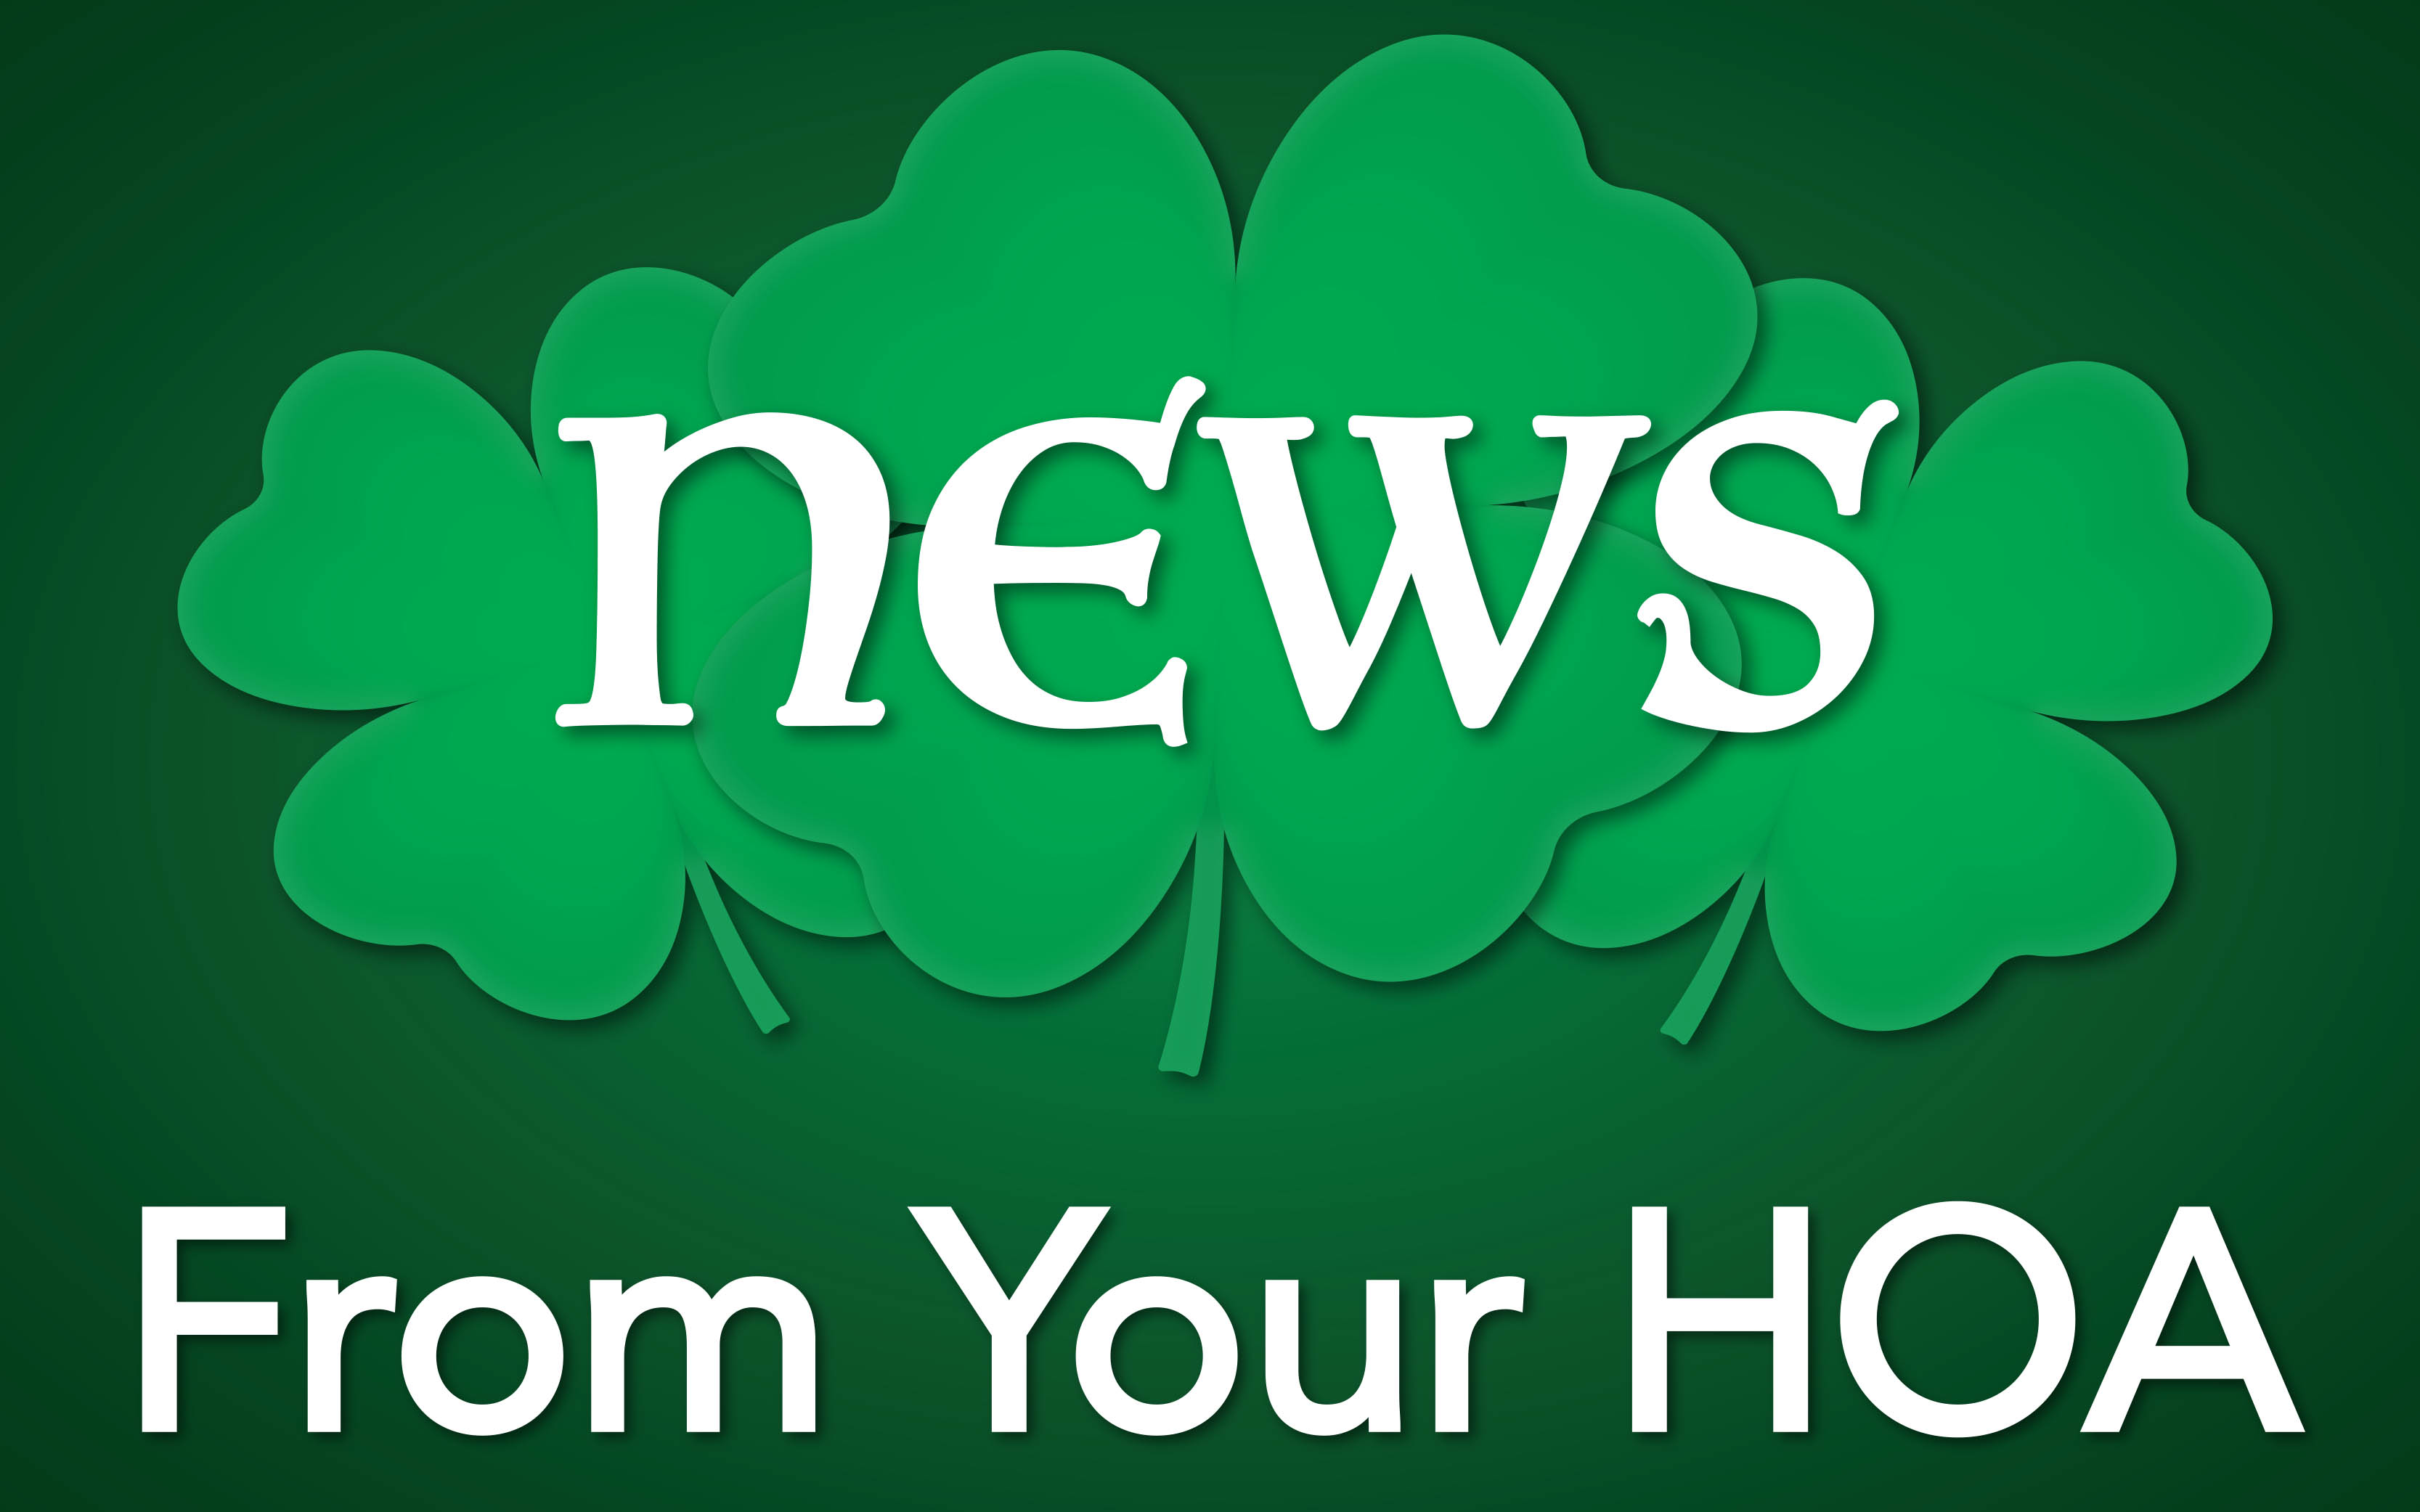 March News From Your HOA